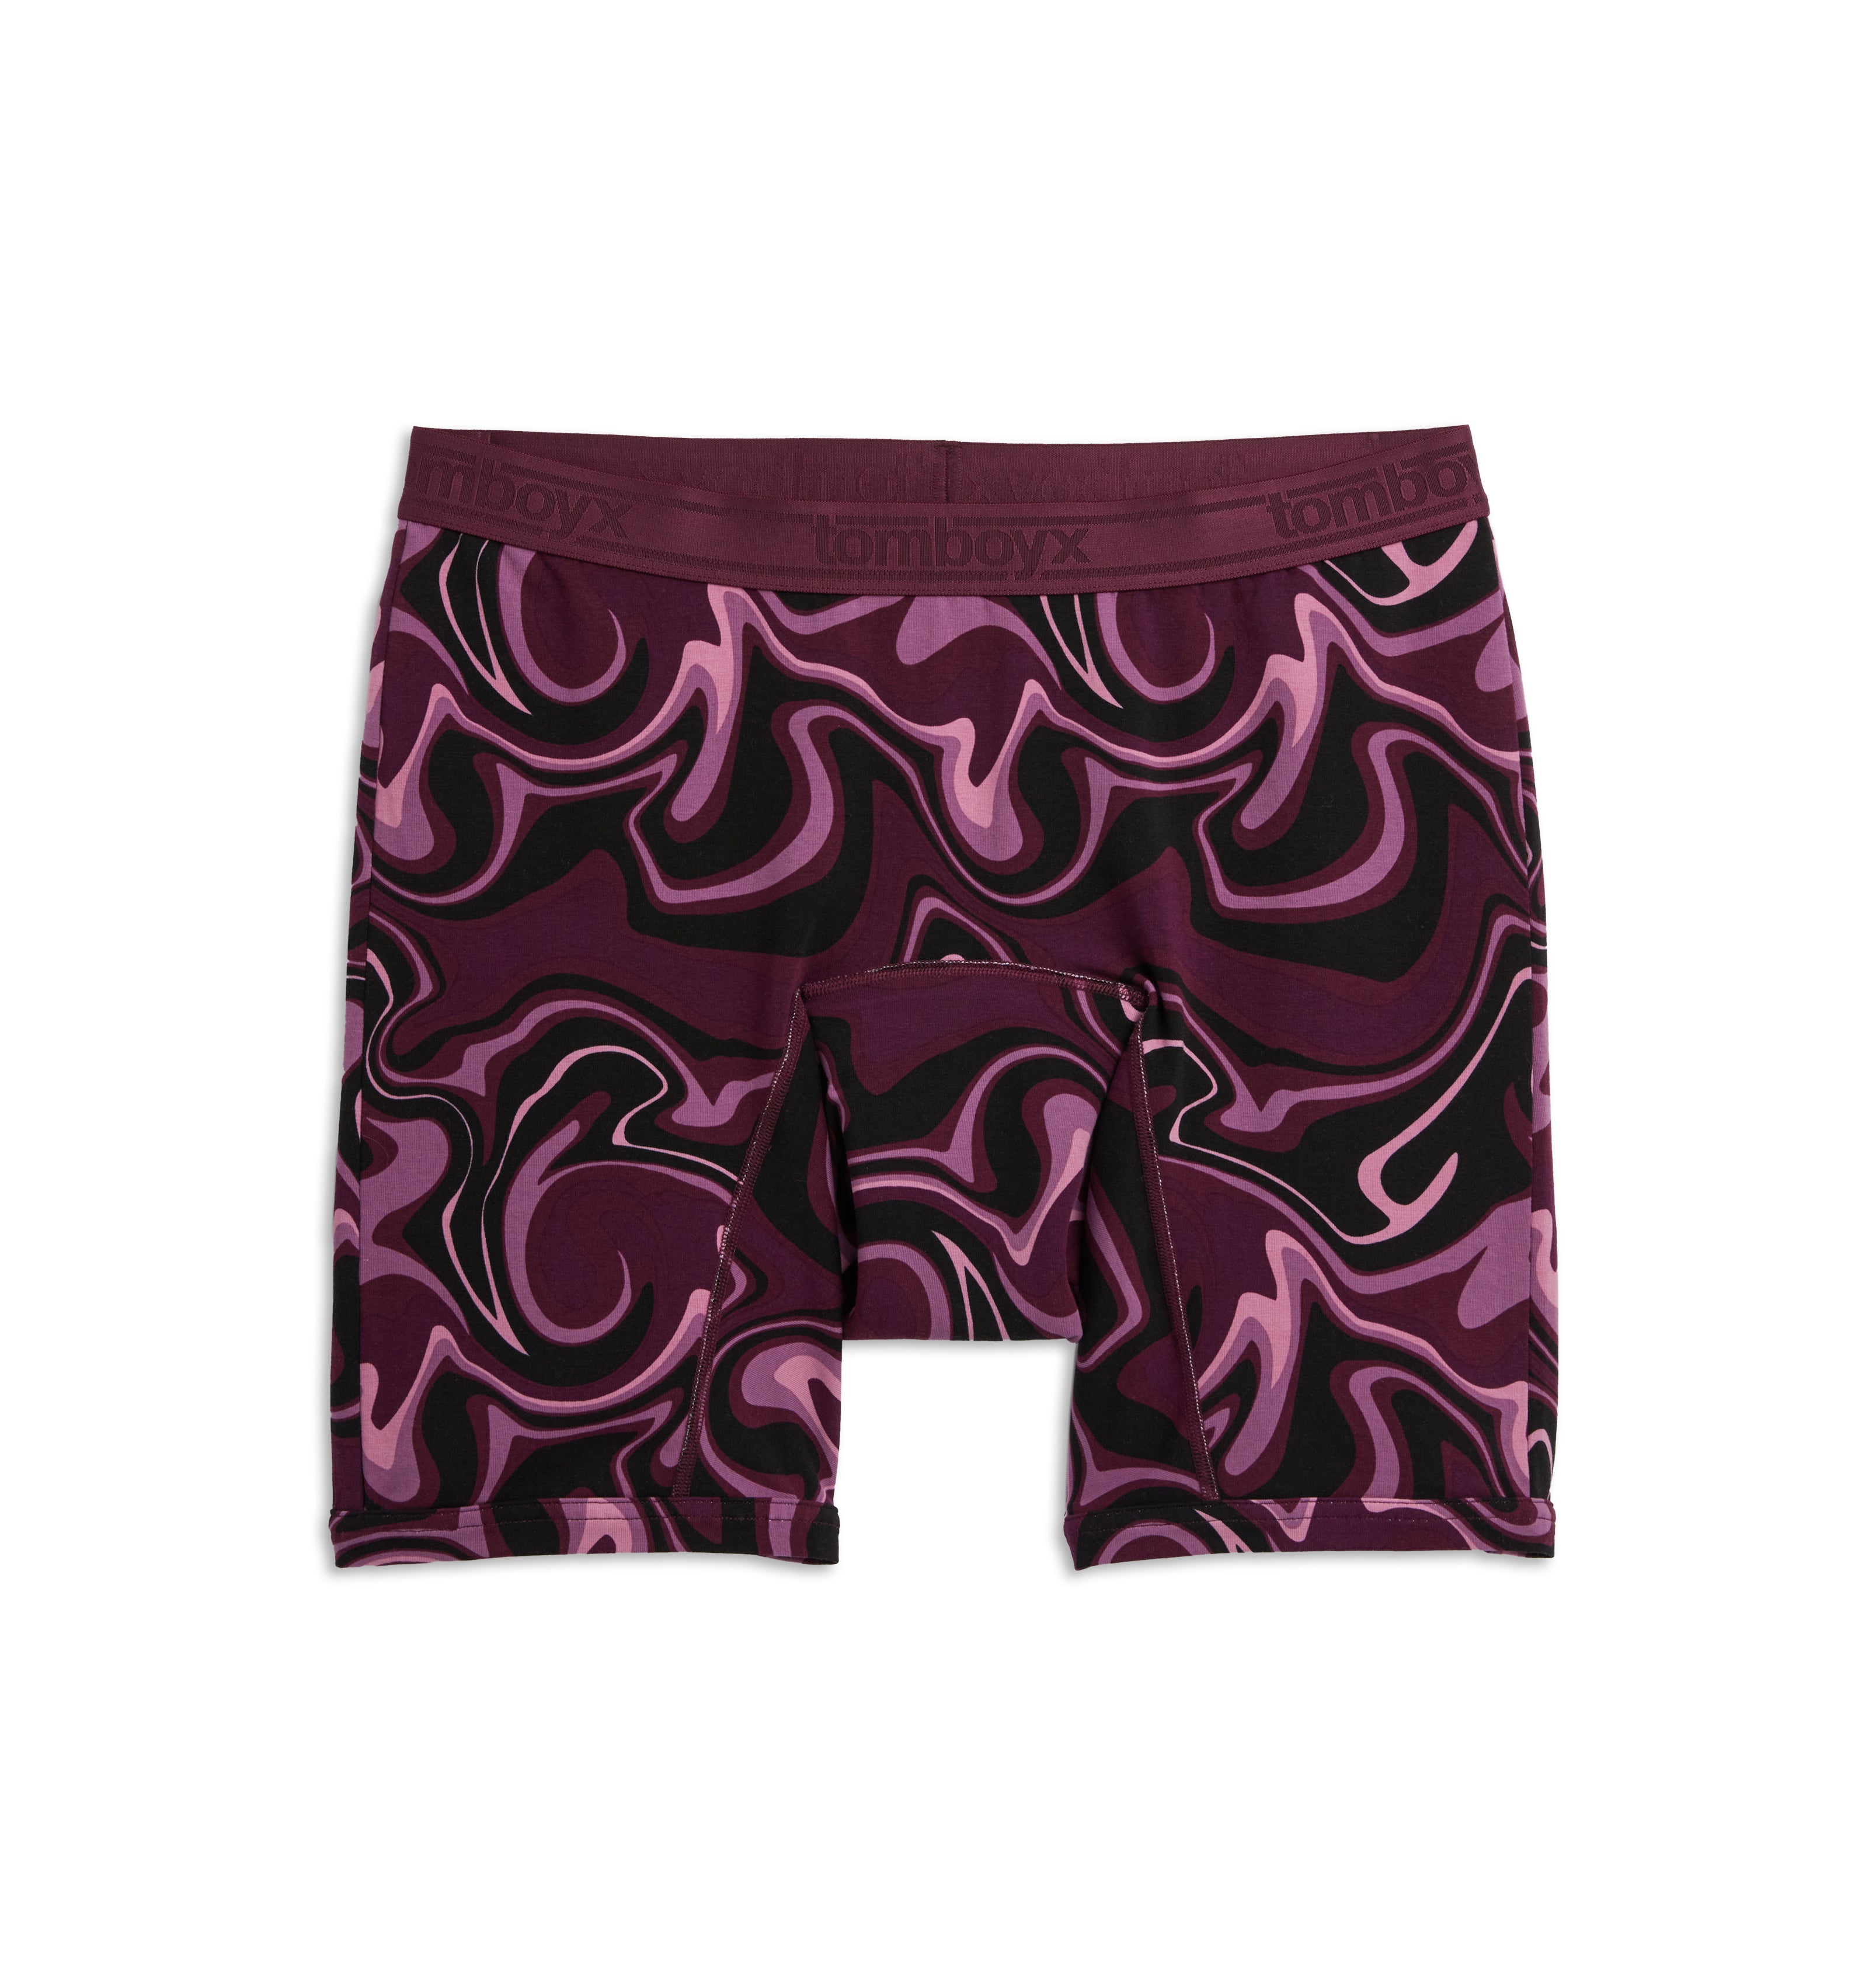 First Line Period 9" Boxer Briefs - Go With The Flow